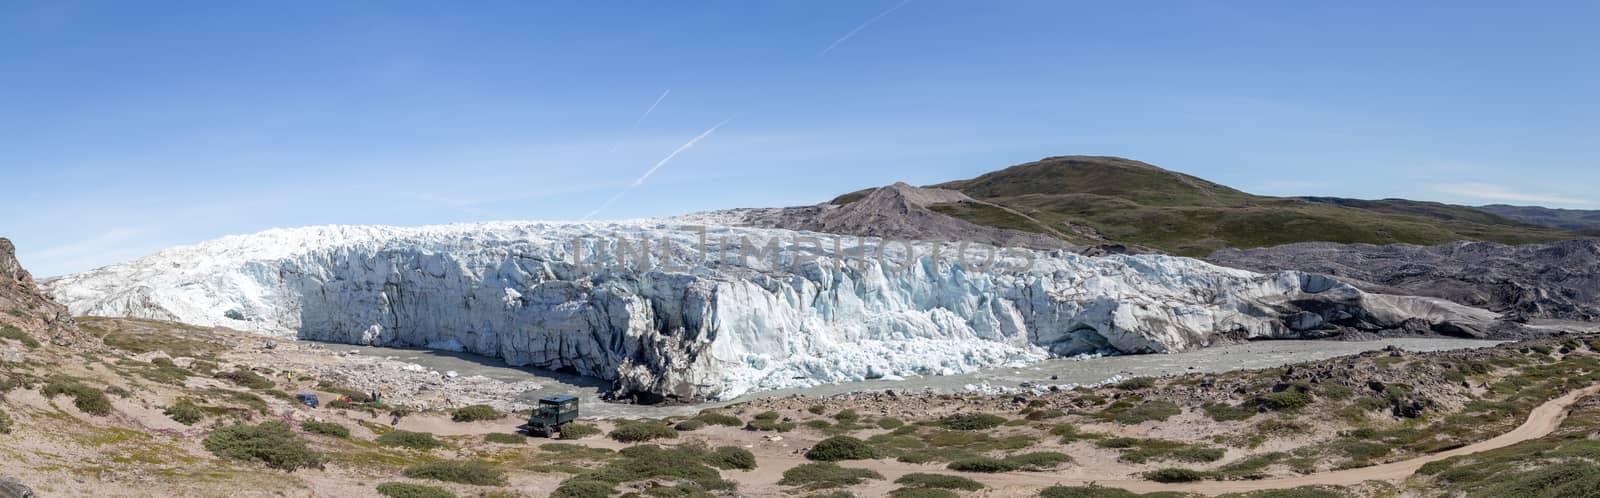 Kangerlussuaq, Greenland - July 13, 2018 Panoramic View of Russell Glacier